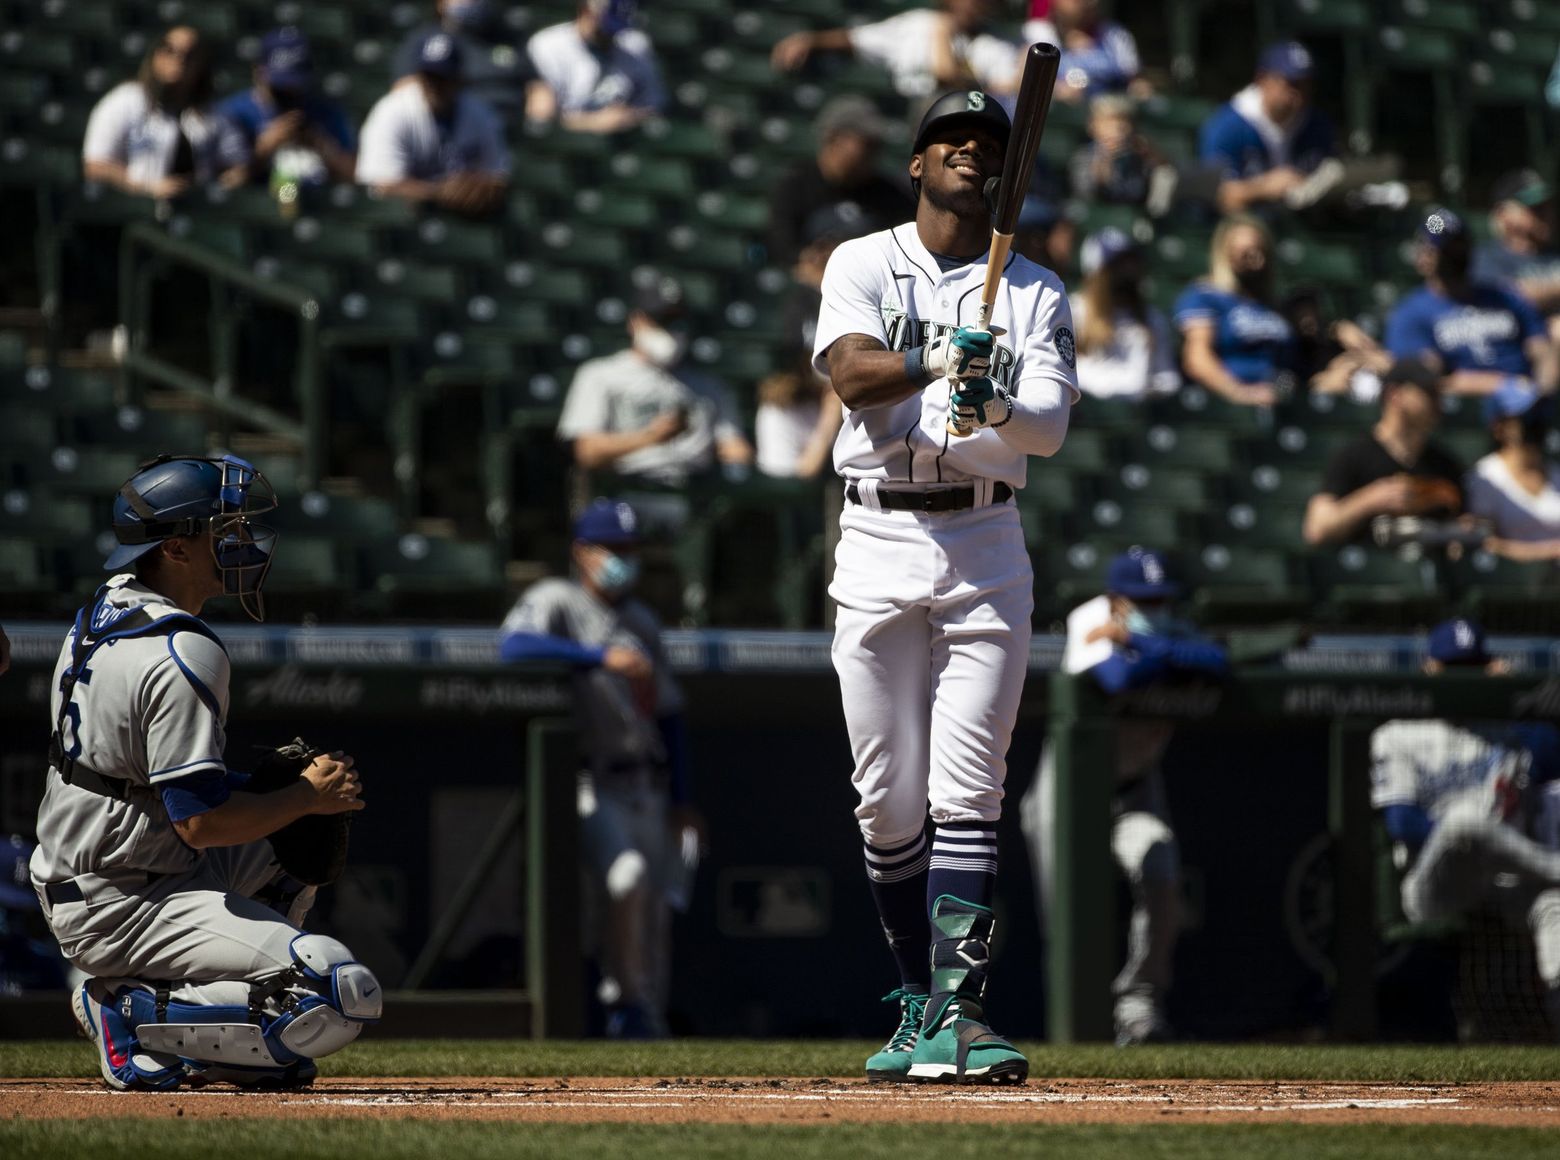 Kyle Lewis makes season debut after missing Mariners' first 17 games